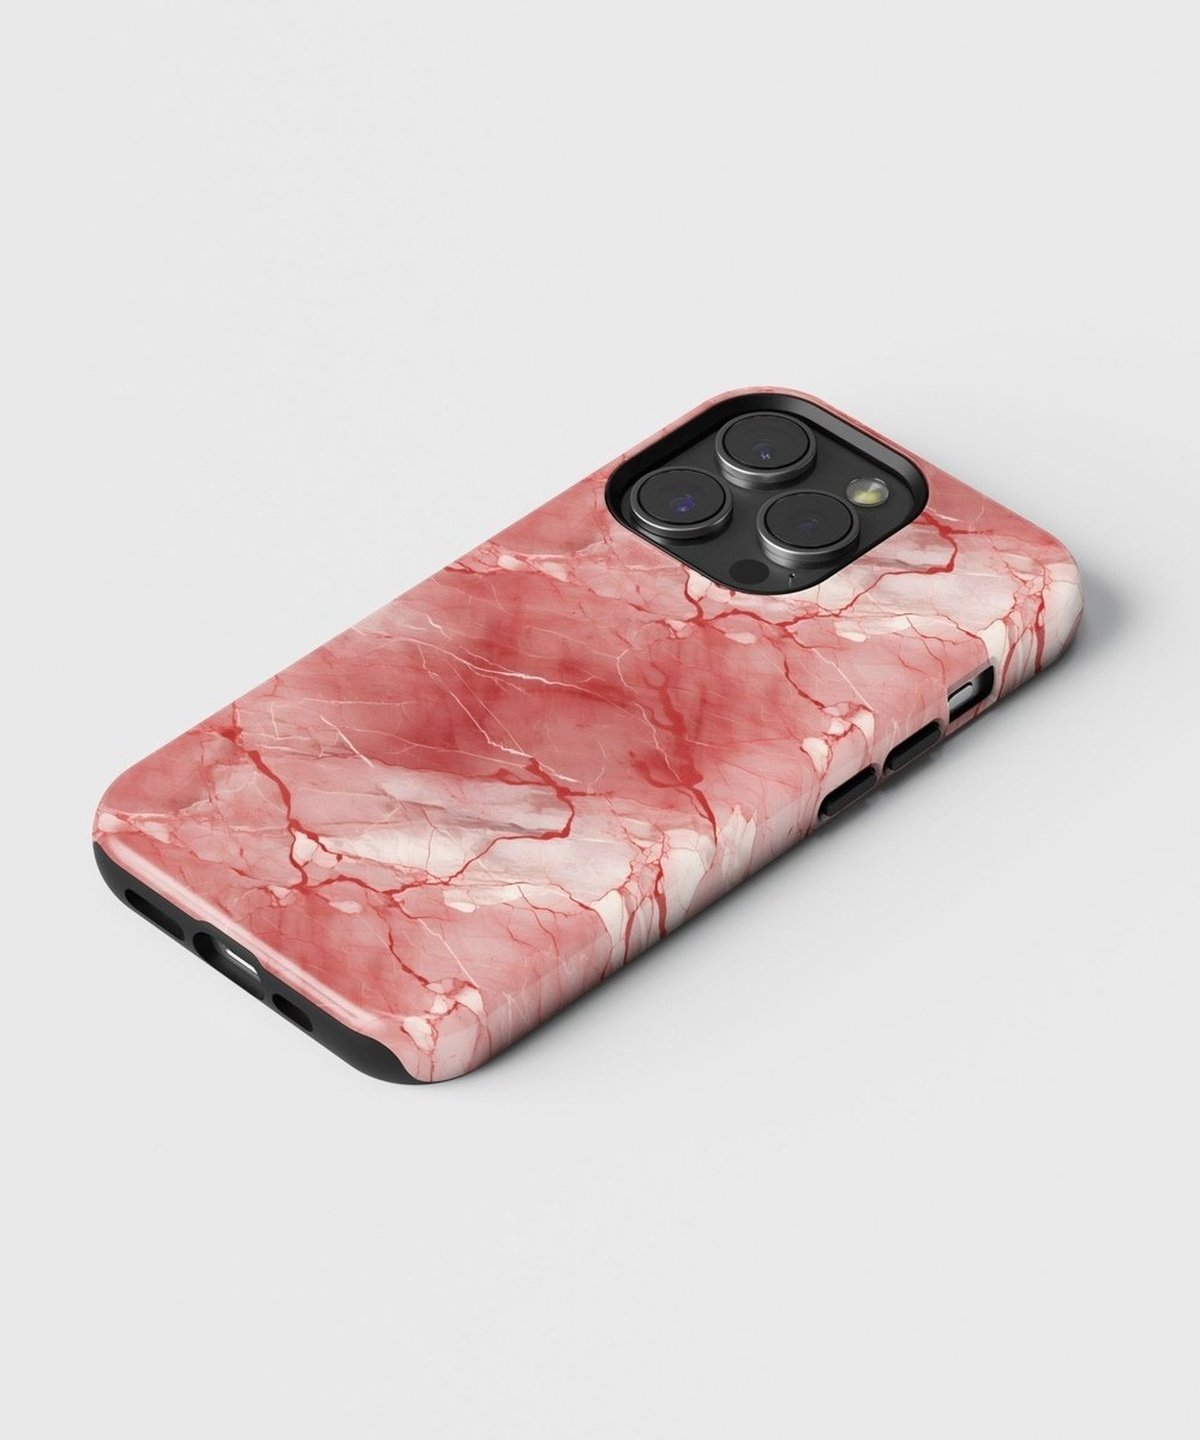 Journey through Marble Realms - iPhone Case